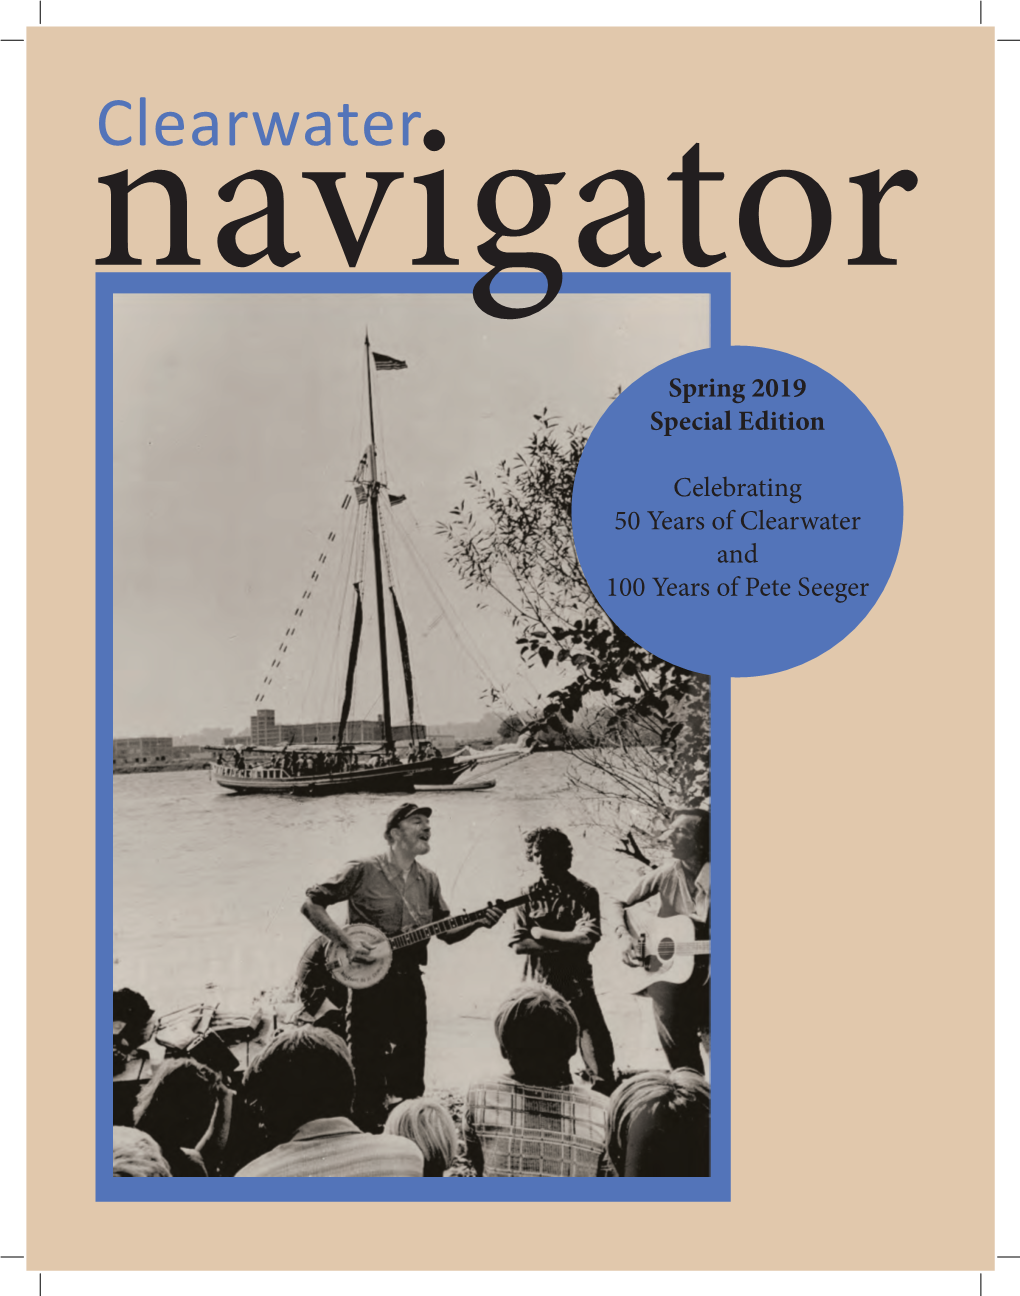 Hudson River Sloop Clearwater, and the Centennial of Clearwater Founder, Pete Seeger